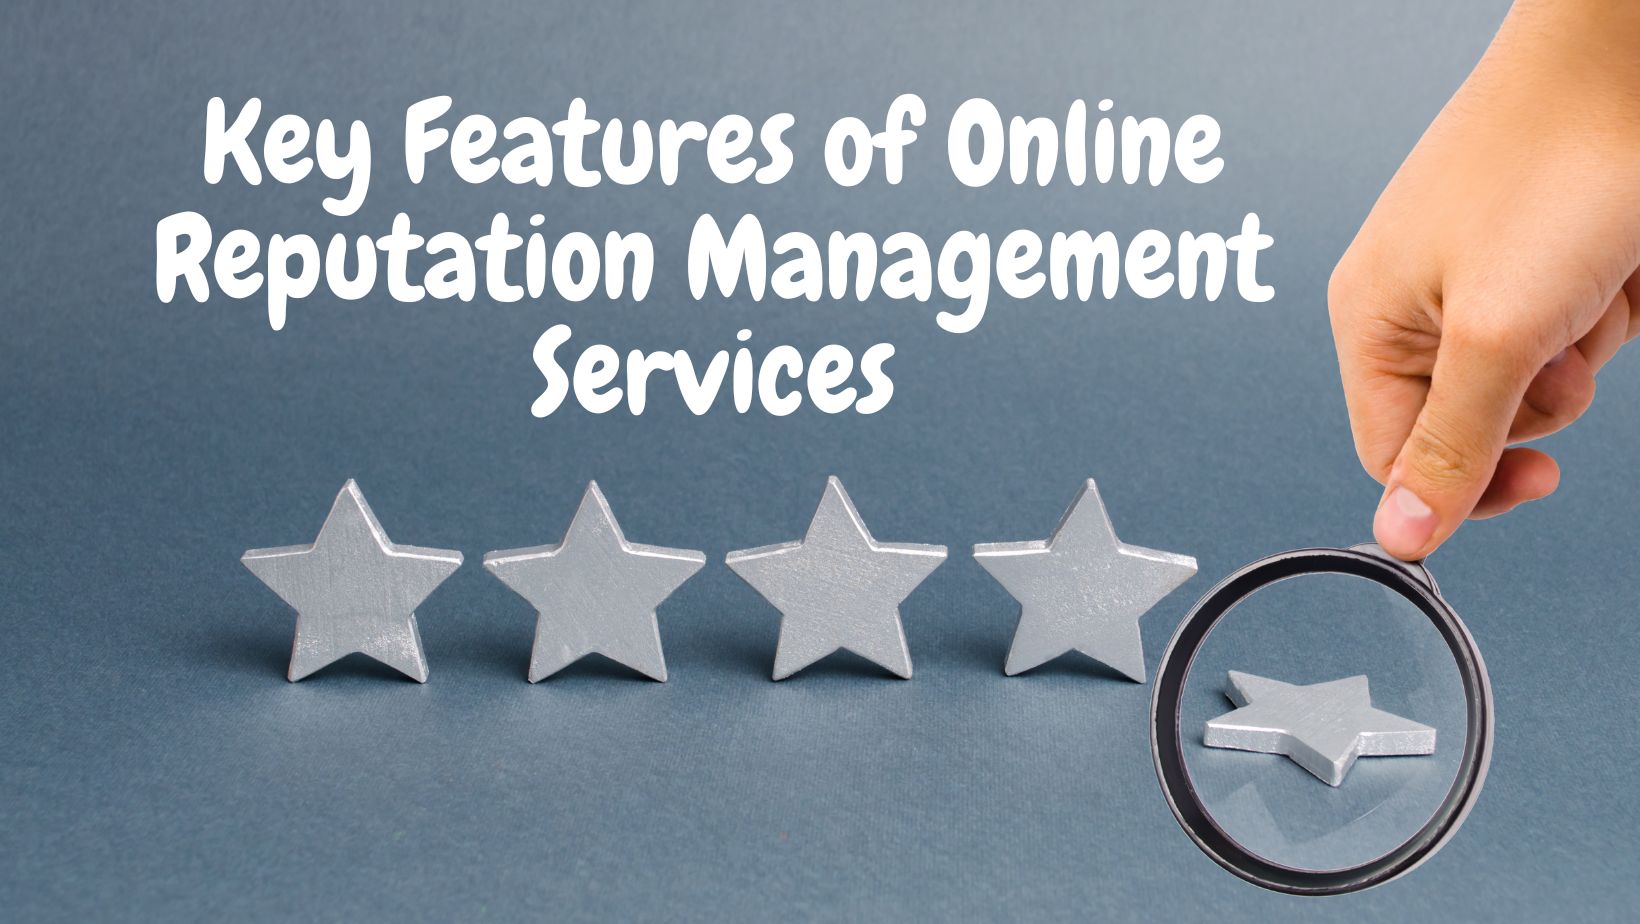 Key Features of Online Reputation Management Services